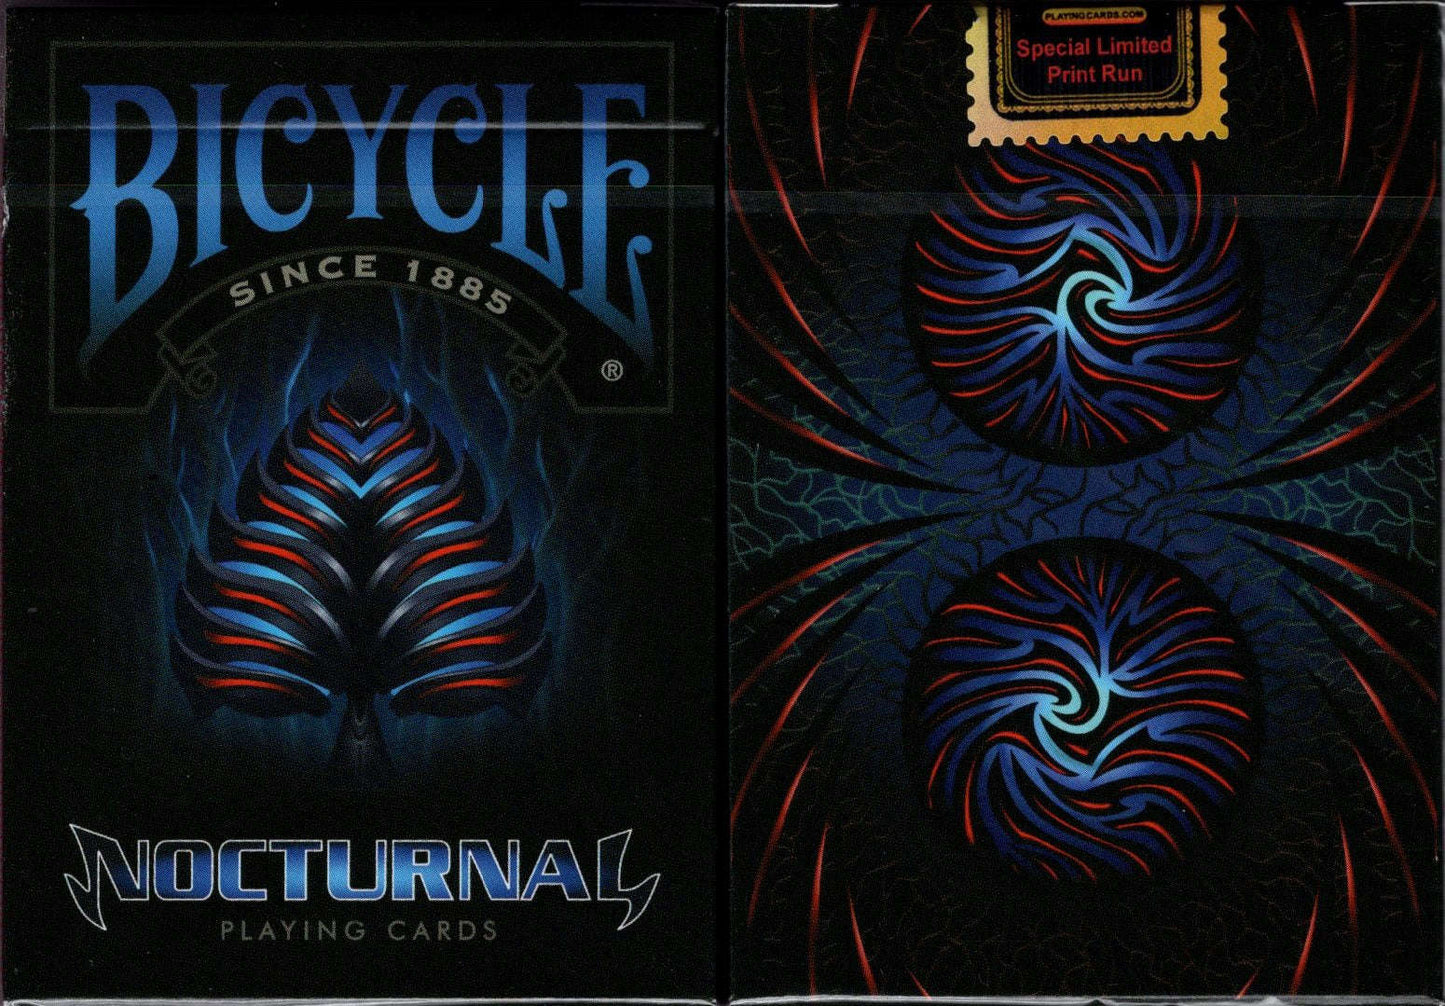 PlayingCardDecks.com-Nocturnal v2 Bicycle Playing Cards